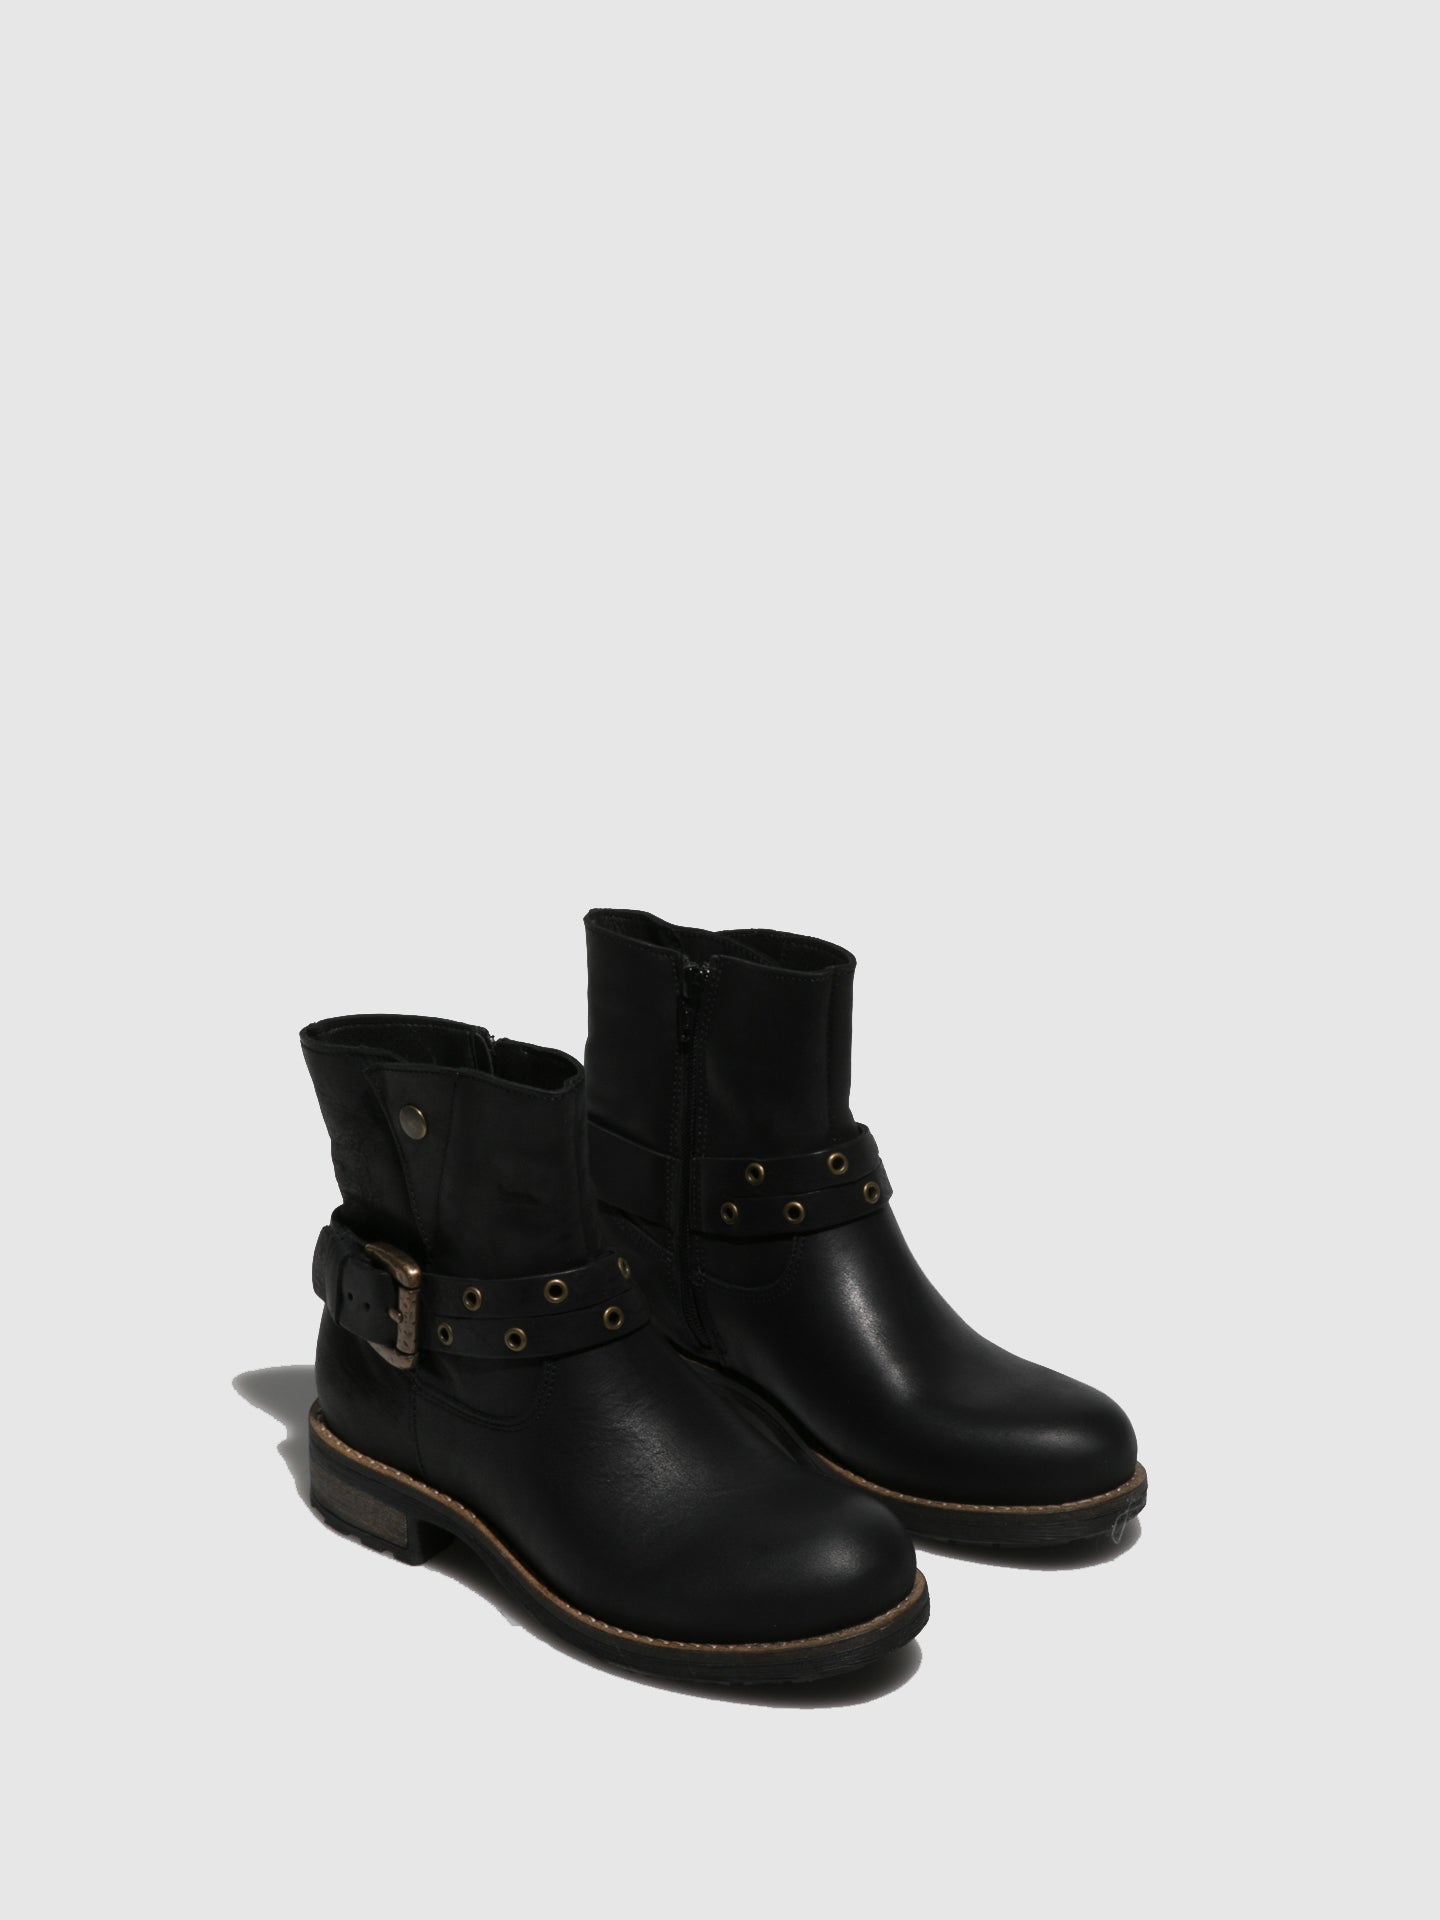 Fungi Black Buckle Ankle Boots